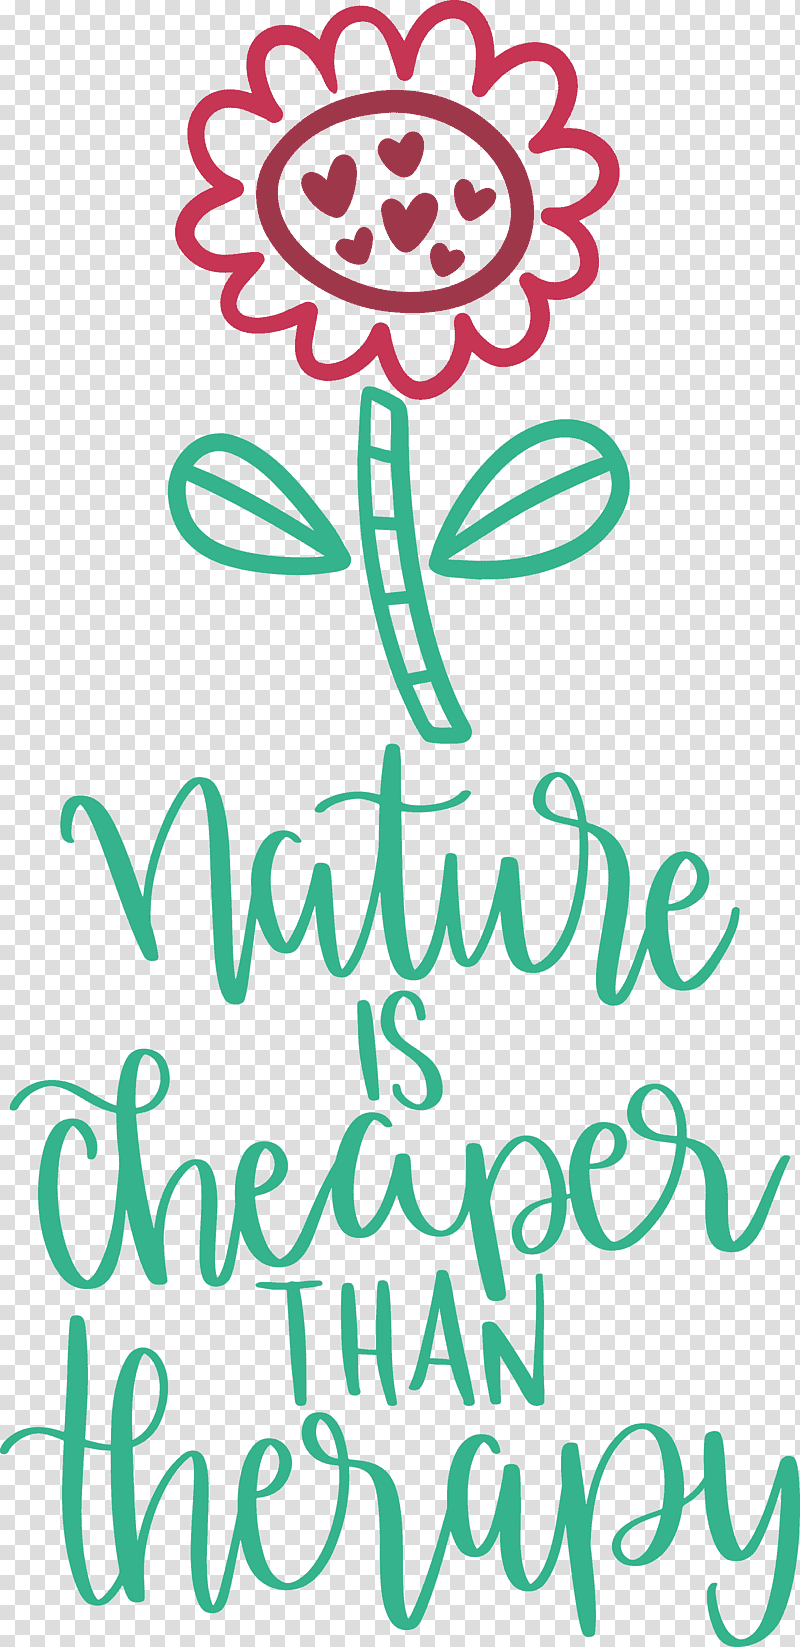 Nature Is Cheaper Than Therapy Nature, Computer, Social Media, Archive File, Menu transparent background PNG clipart